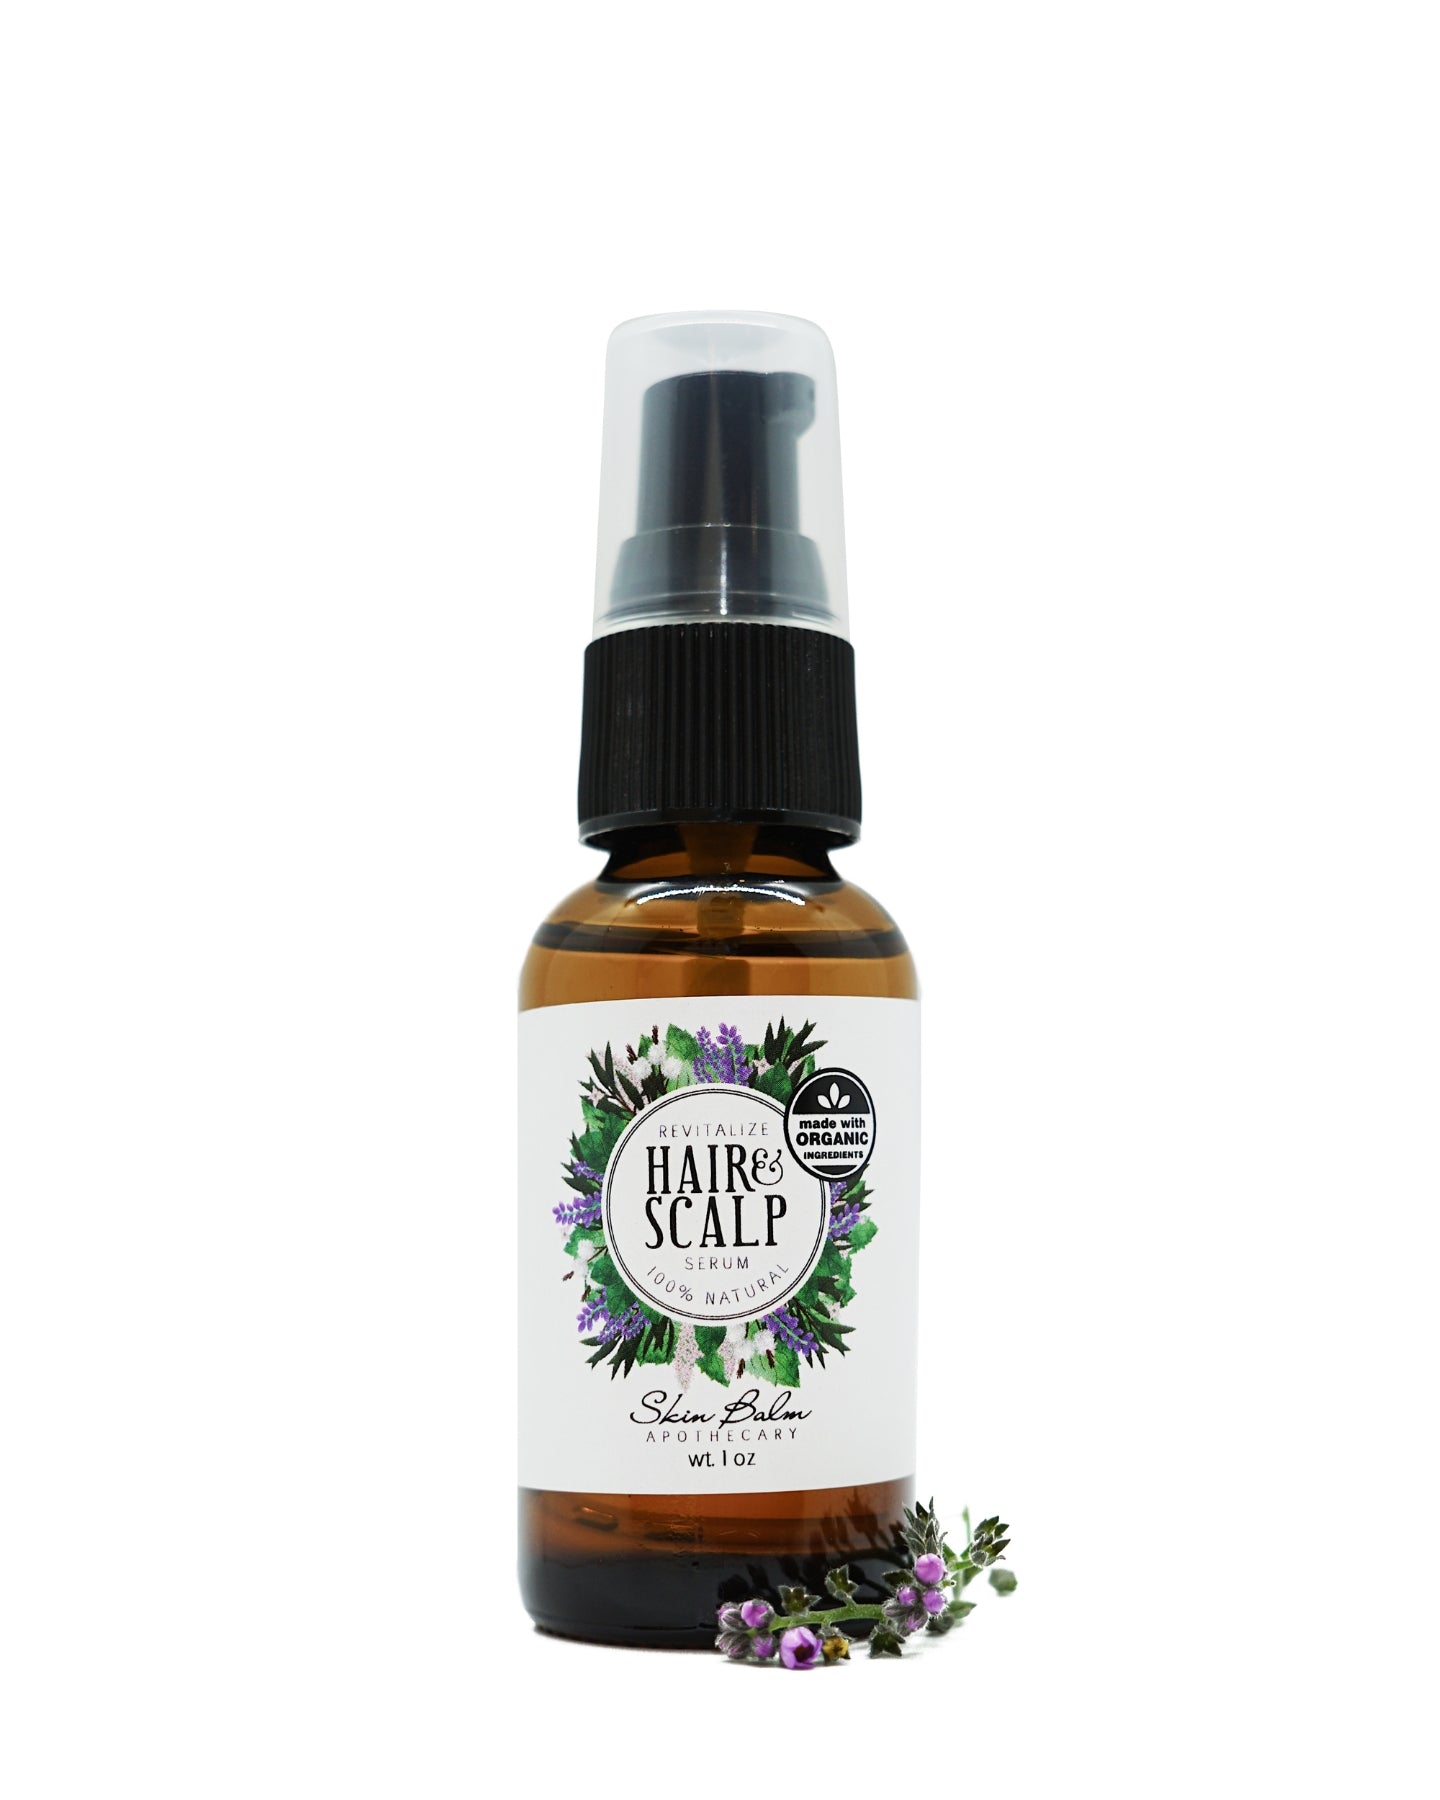 Revitalize Hair & Scalp Serum with purple flowers against a white background.